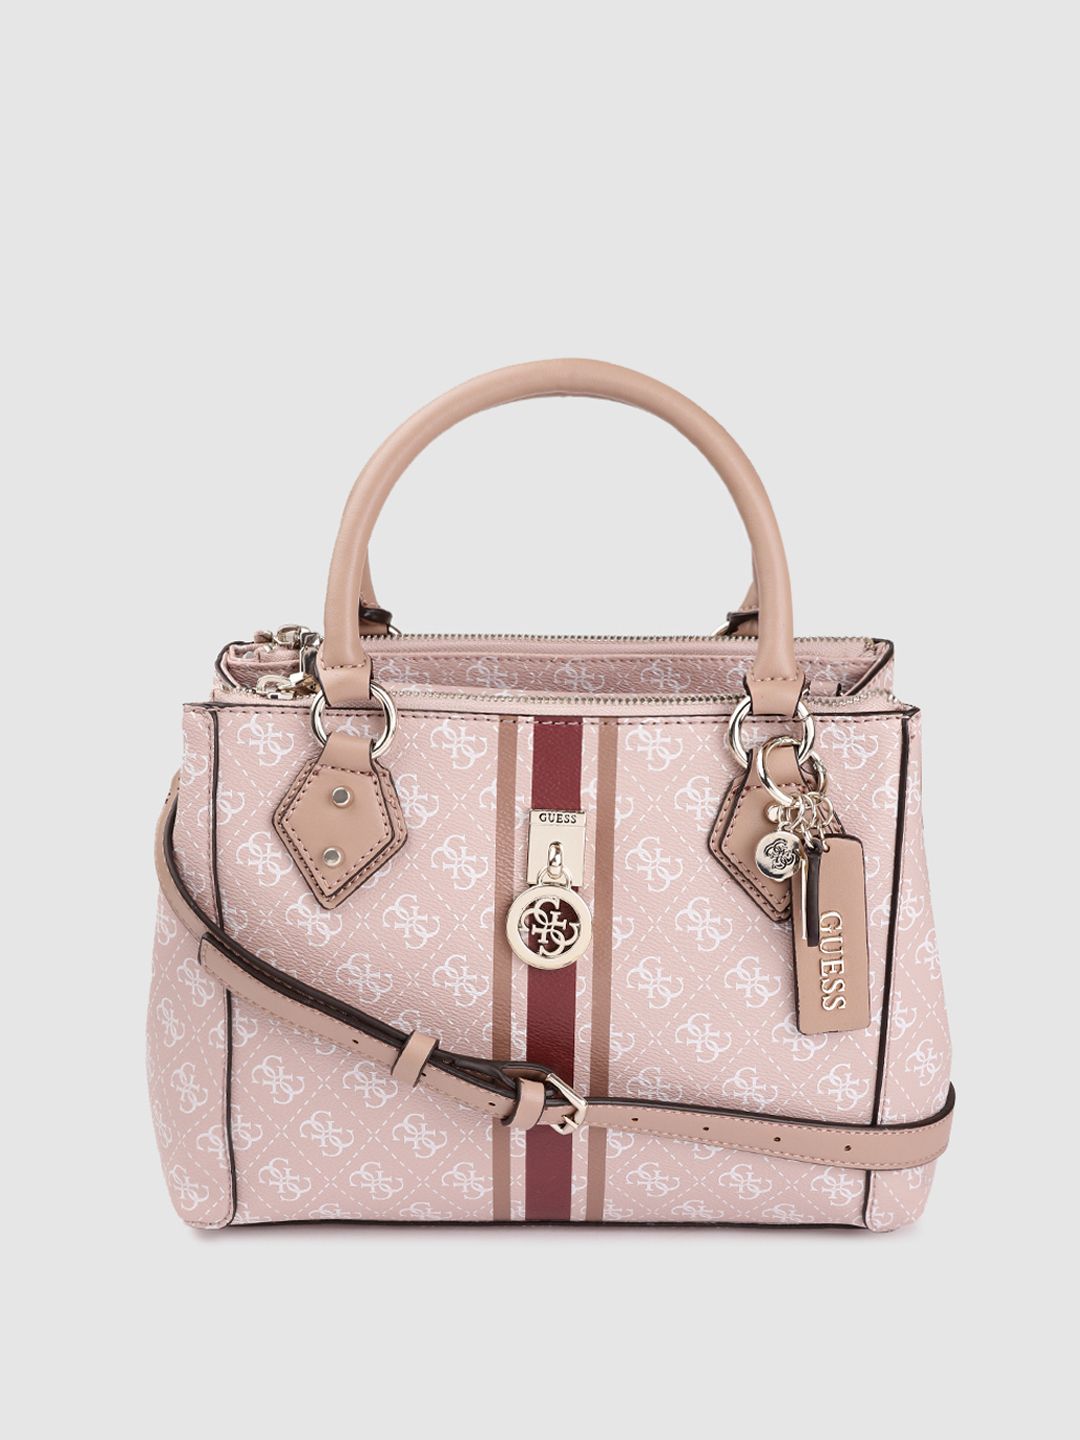 GUESS Pink Brand Logo Print Handheld Bag Price in India, Full  Specifications & Offers